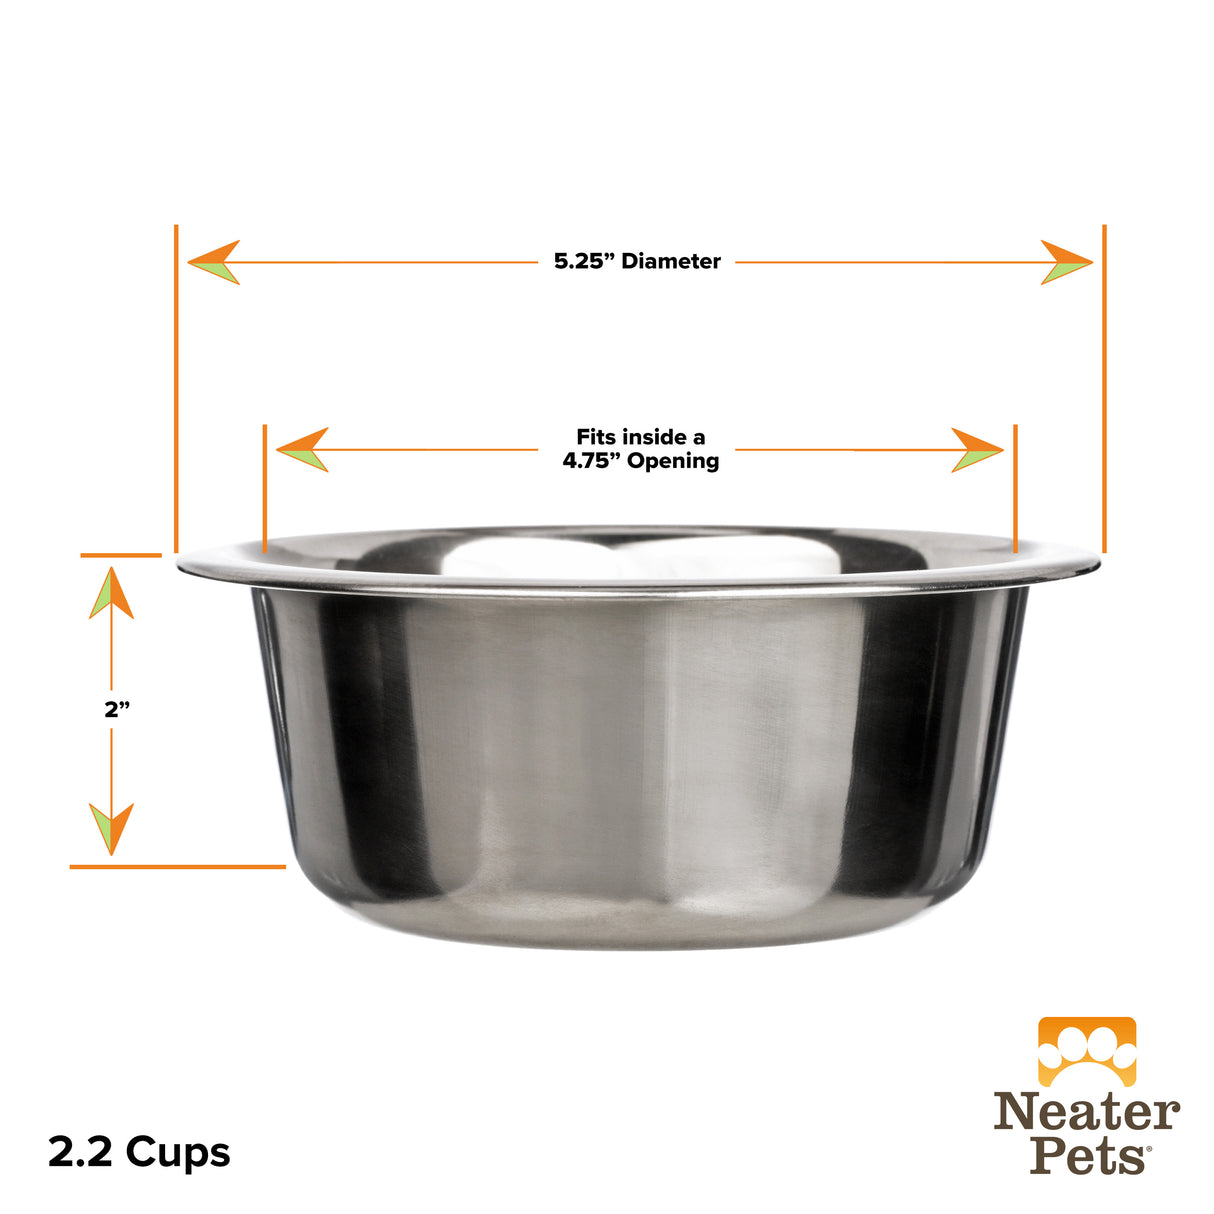 Stainless Steel Bowl 2.2 cup dimensions